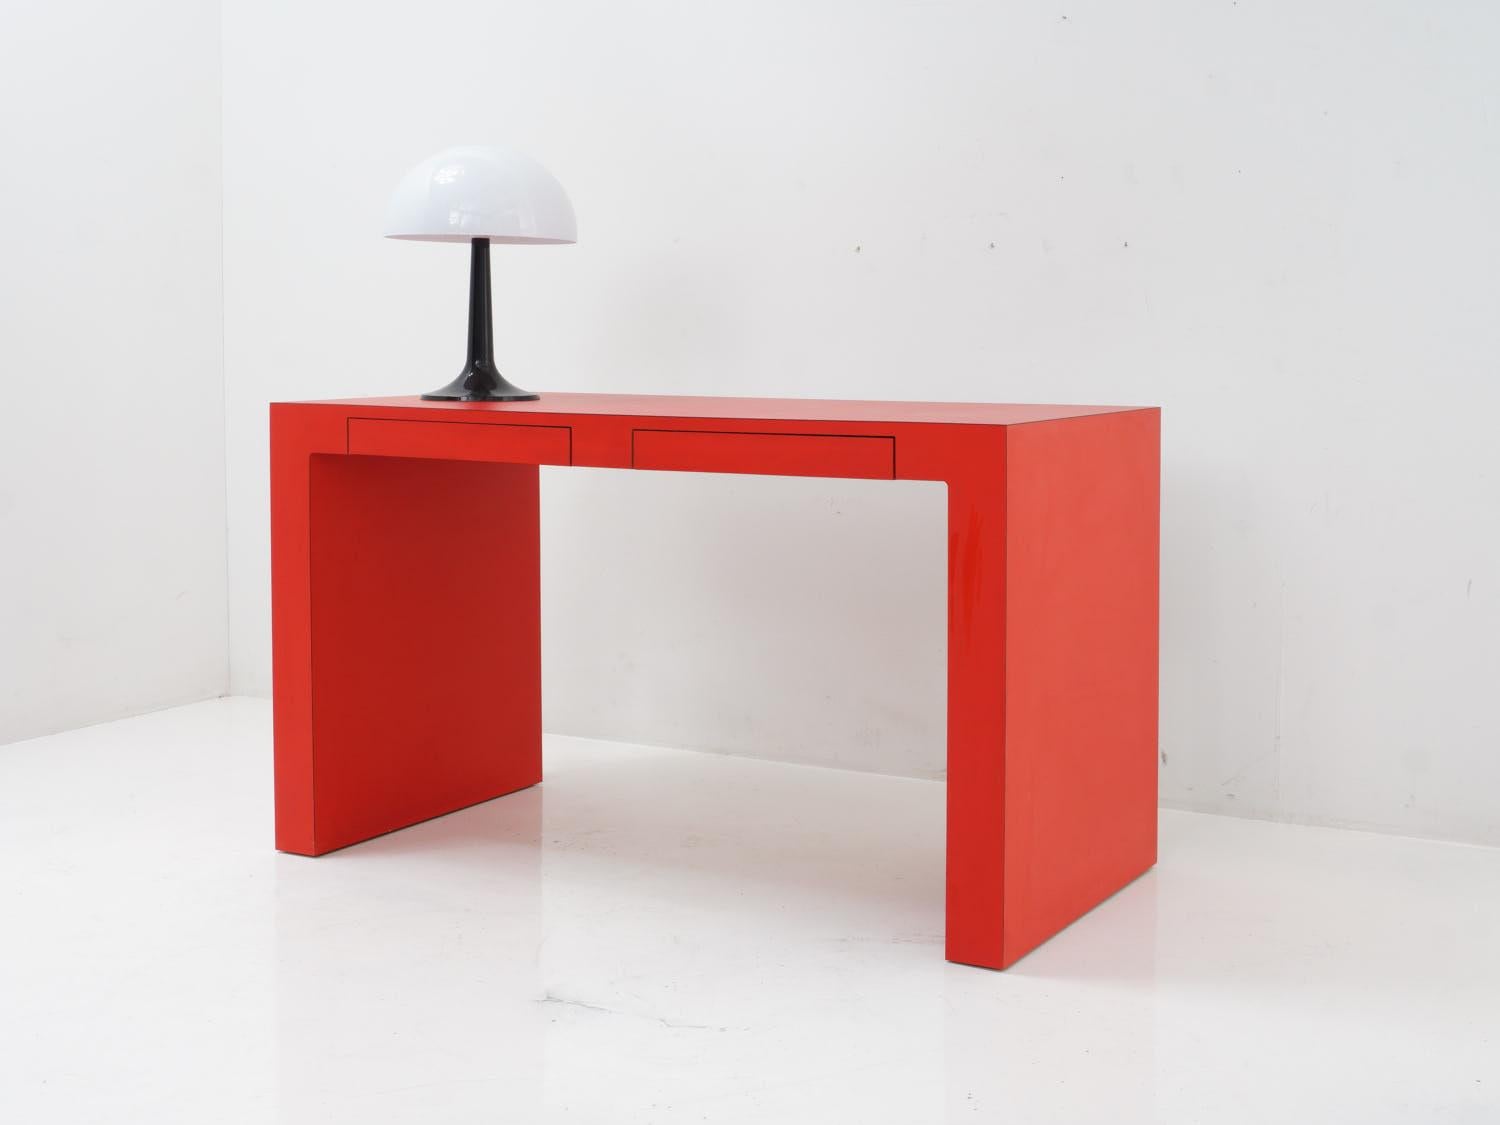 This red laminate vanity table is the perfect place to get ready for your day. Whether you're applying makeup or just staring at your reflection in admiration, the vibrant color and smooth surface will make every moment feel glamorous.

- 28